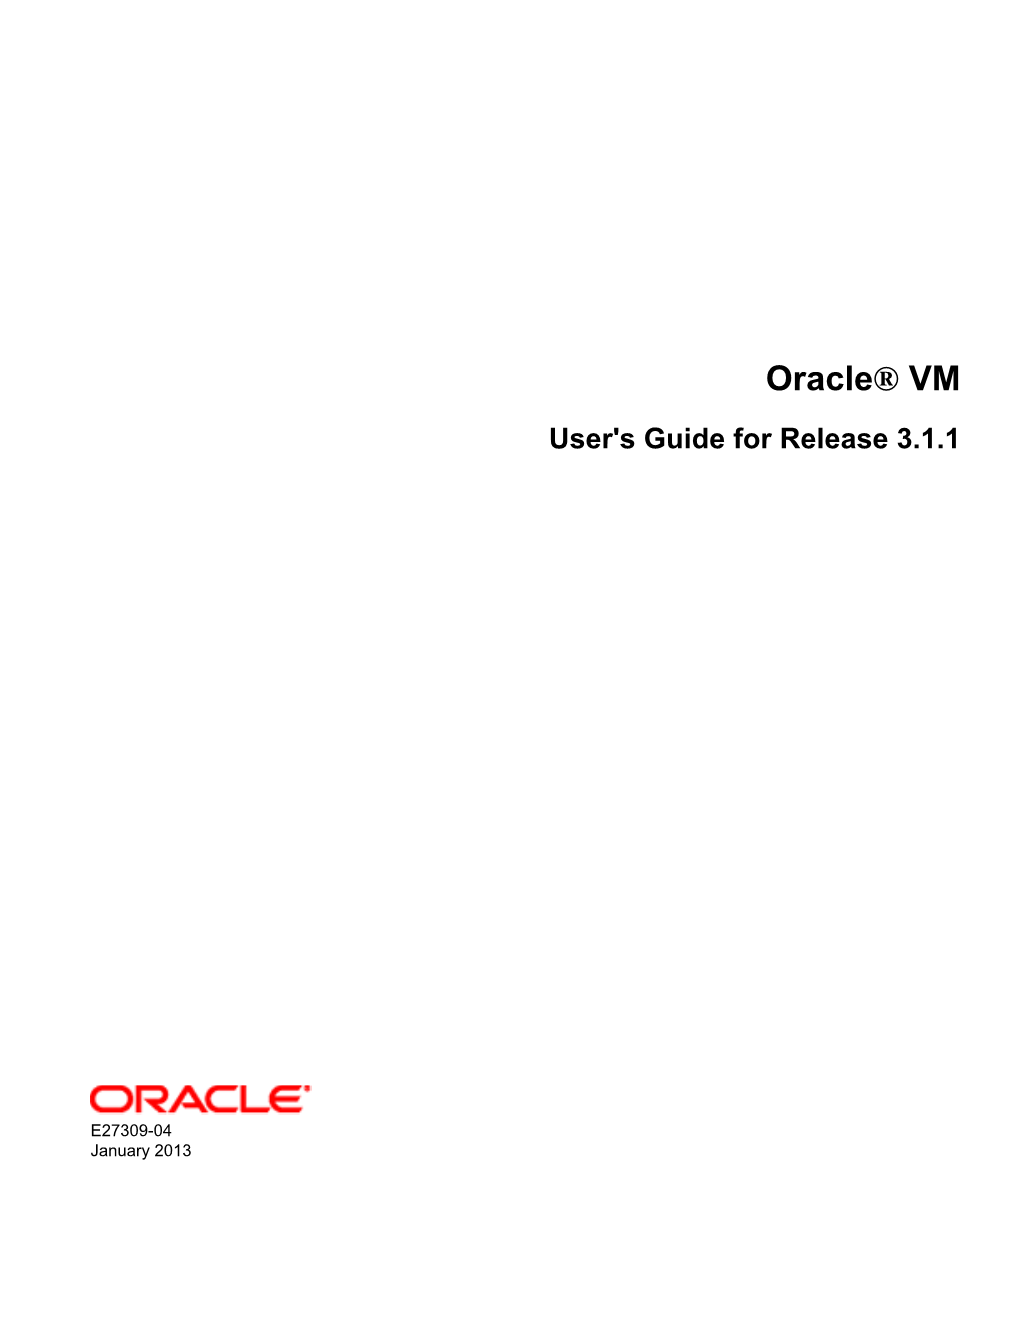 Oracle® VM User's Guide for Release 3.1.1